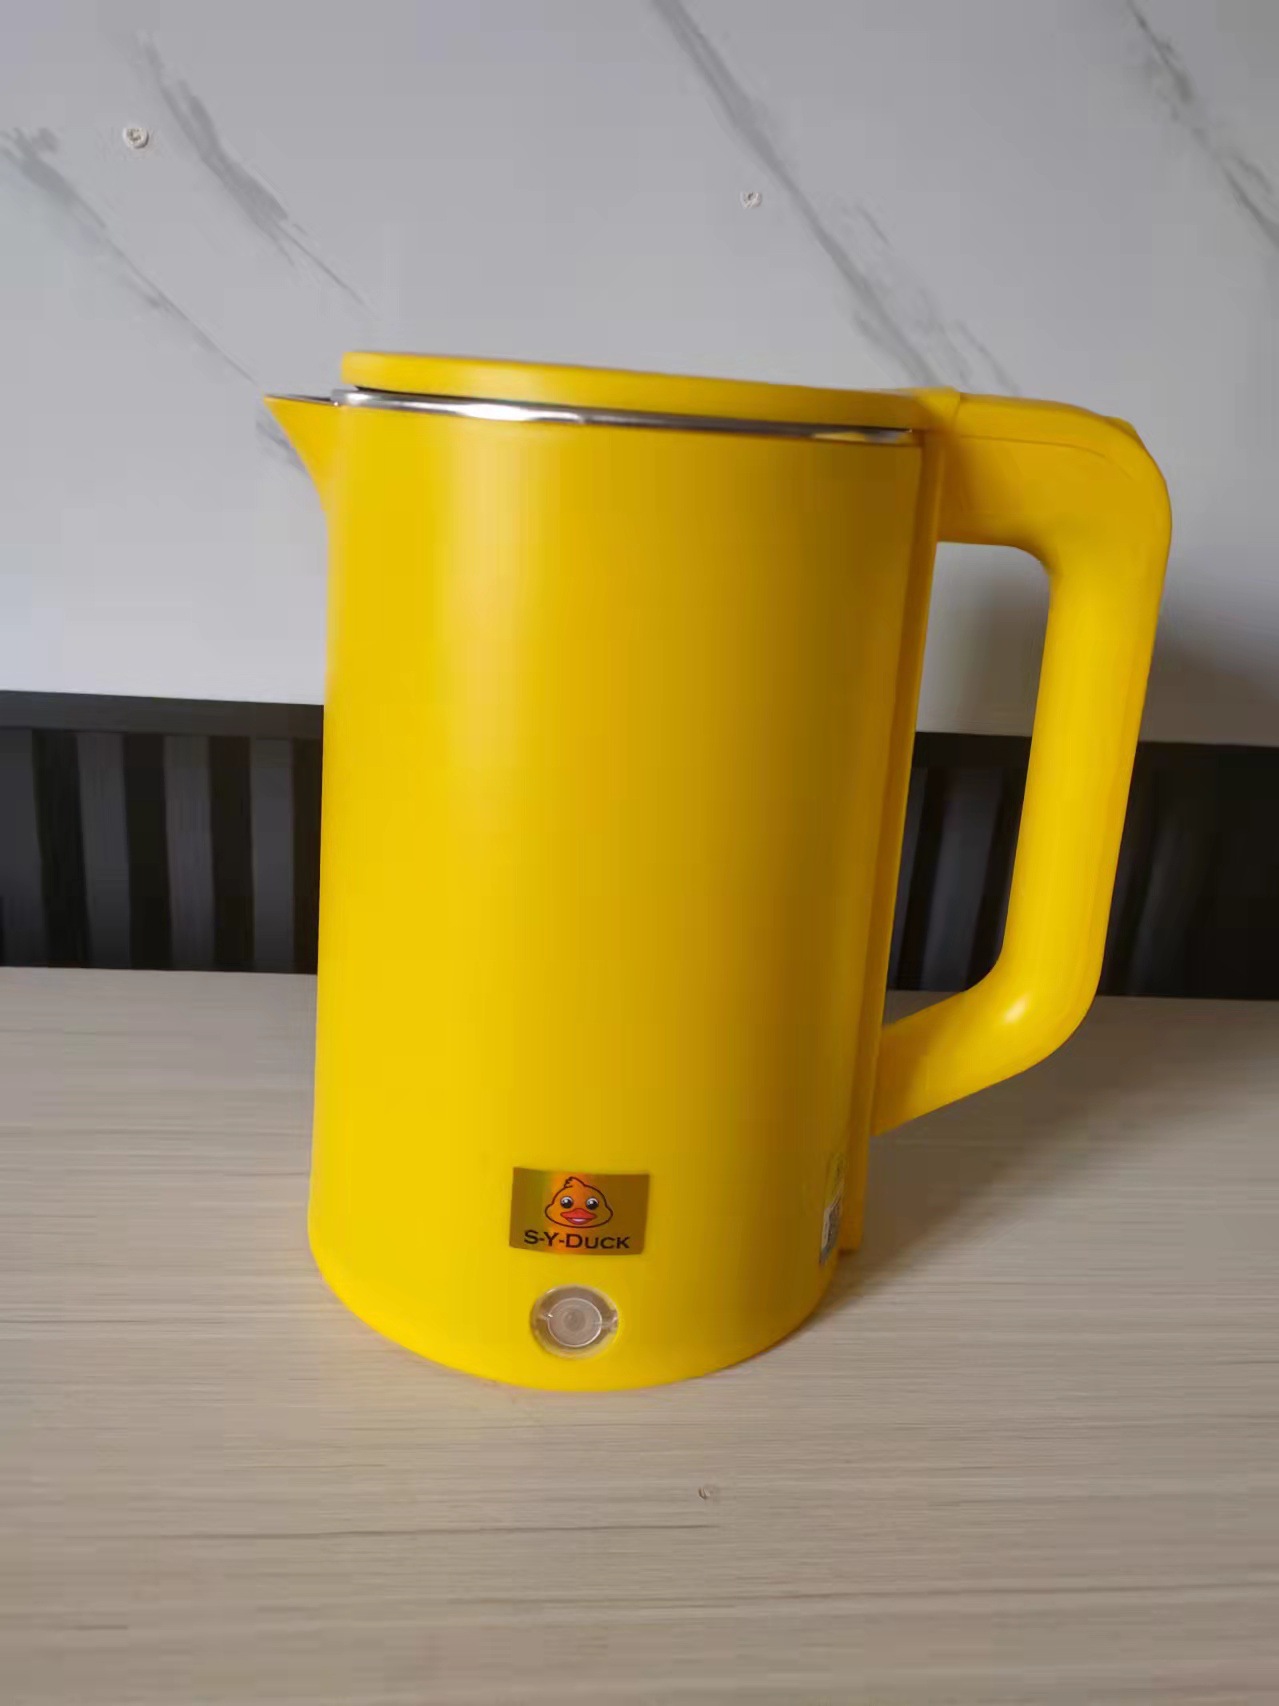 Kettle Household Water Boiling Kettle Automatic Power-off Thermal Kettle Jewelry Special Edition Printed Electric Kettle